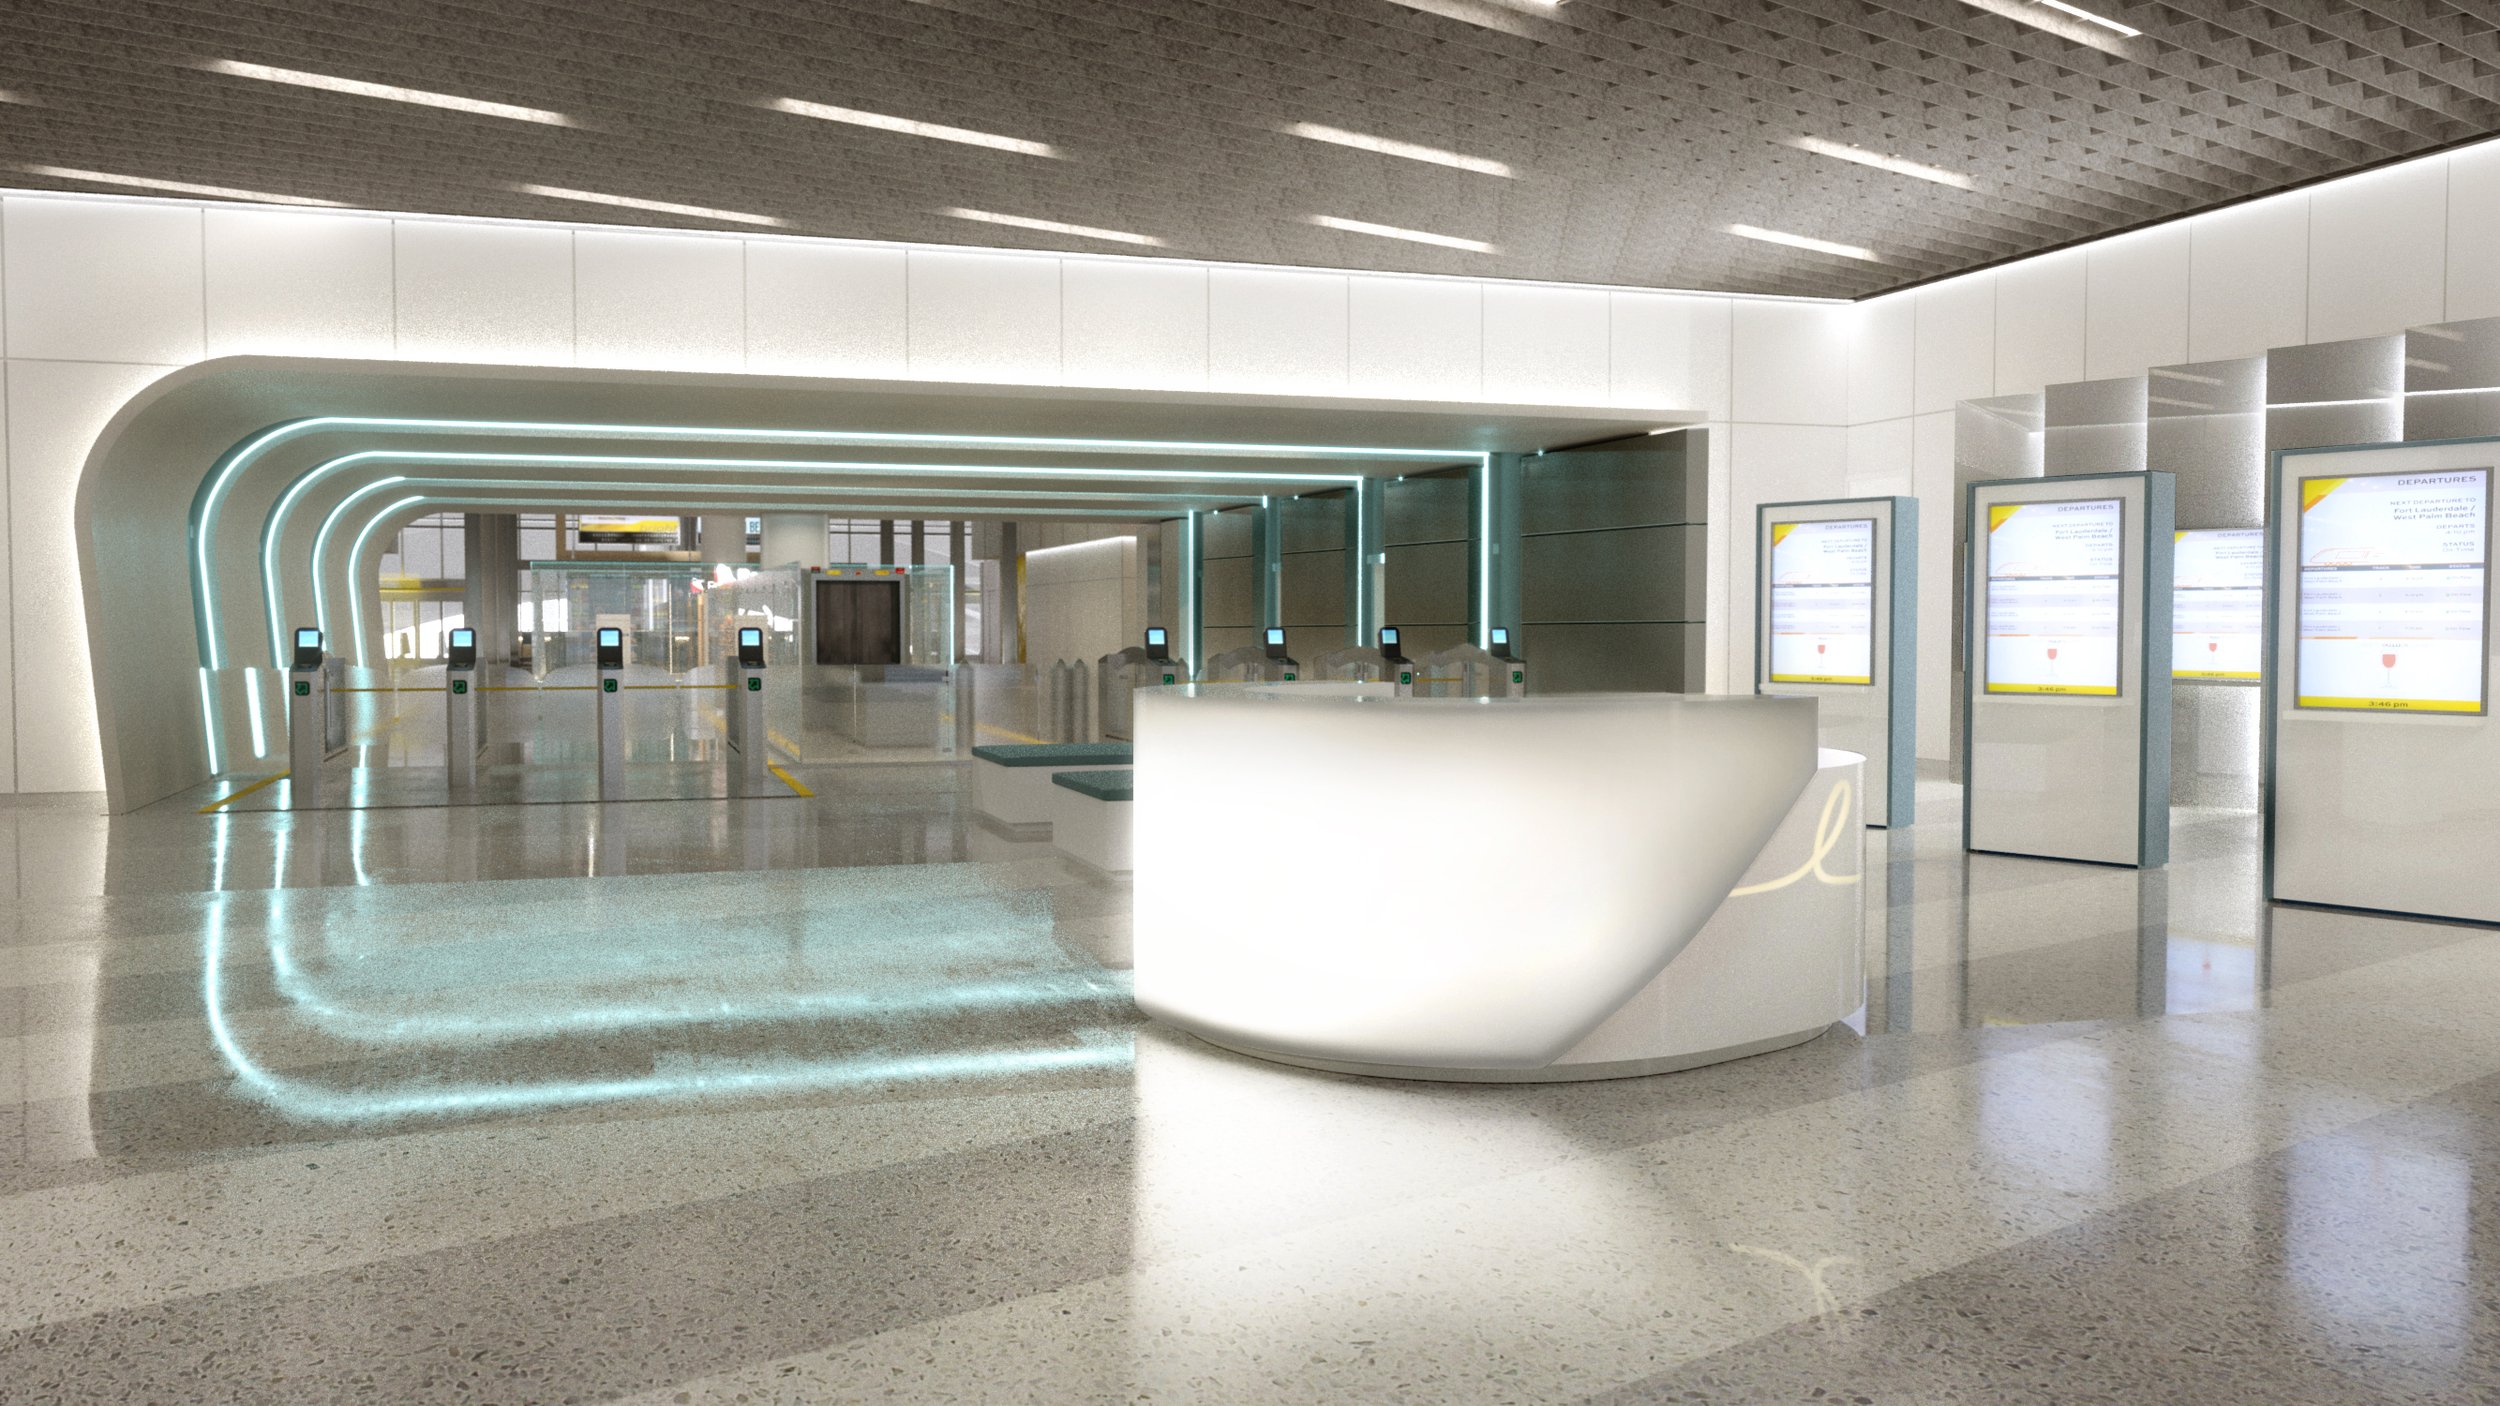 Brightline Reveals New Renderings Giving First Look Inside Its Future Orlando Station 2.jpg